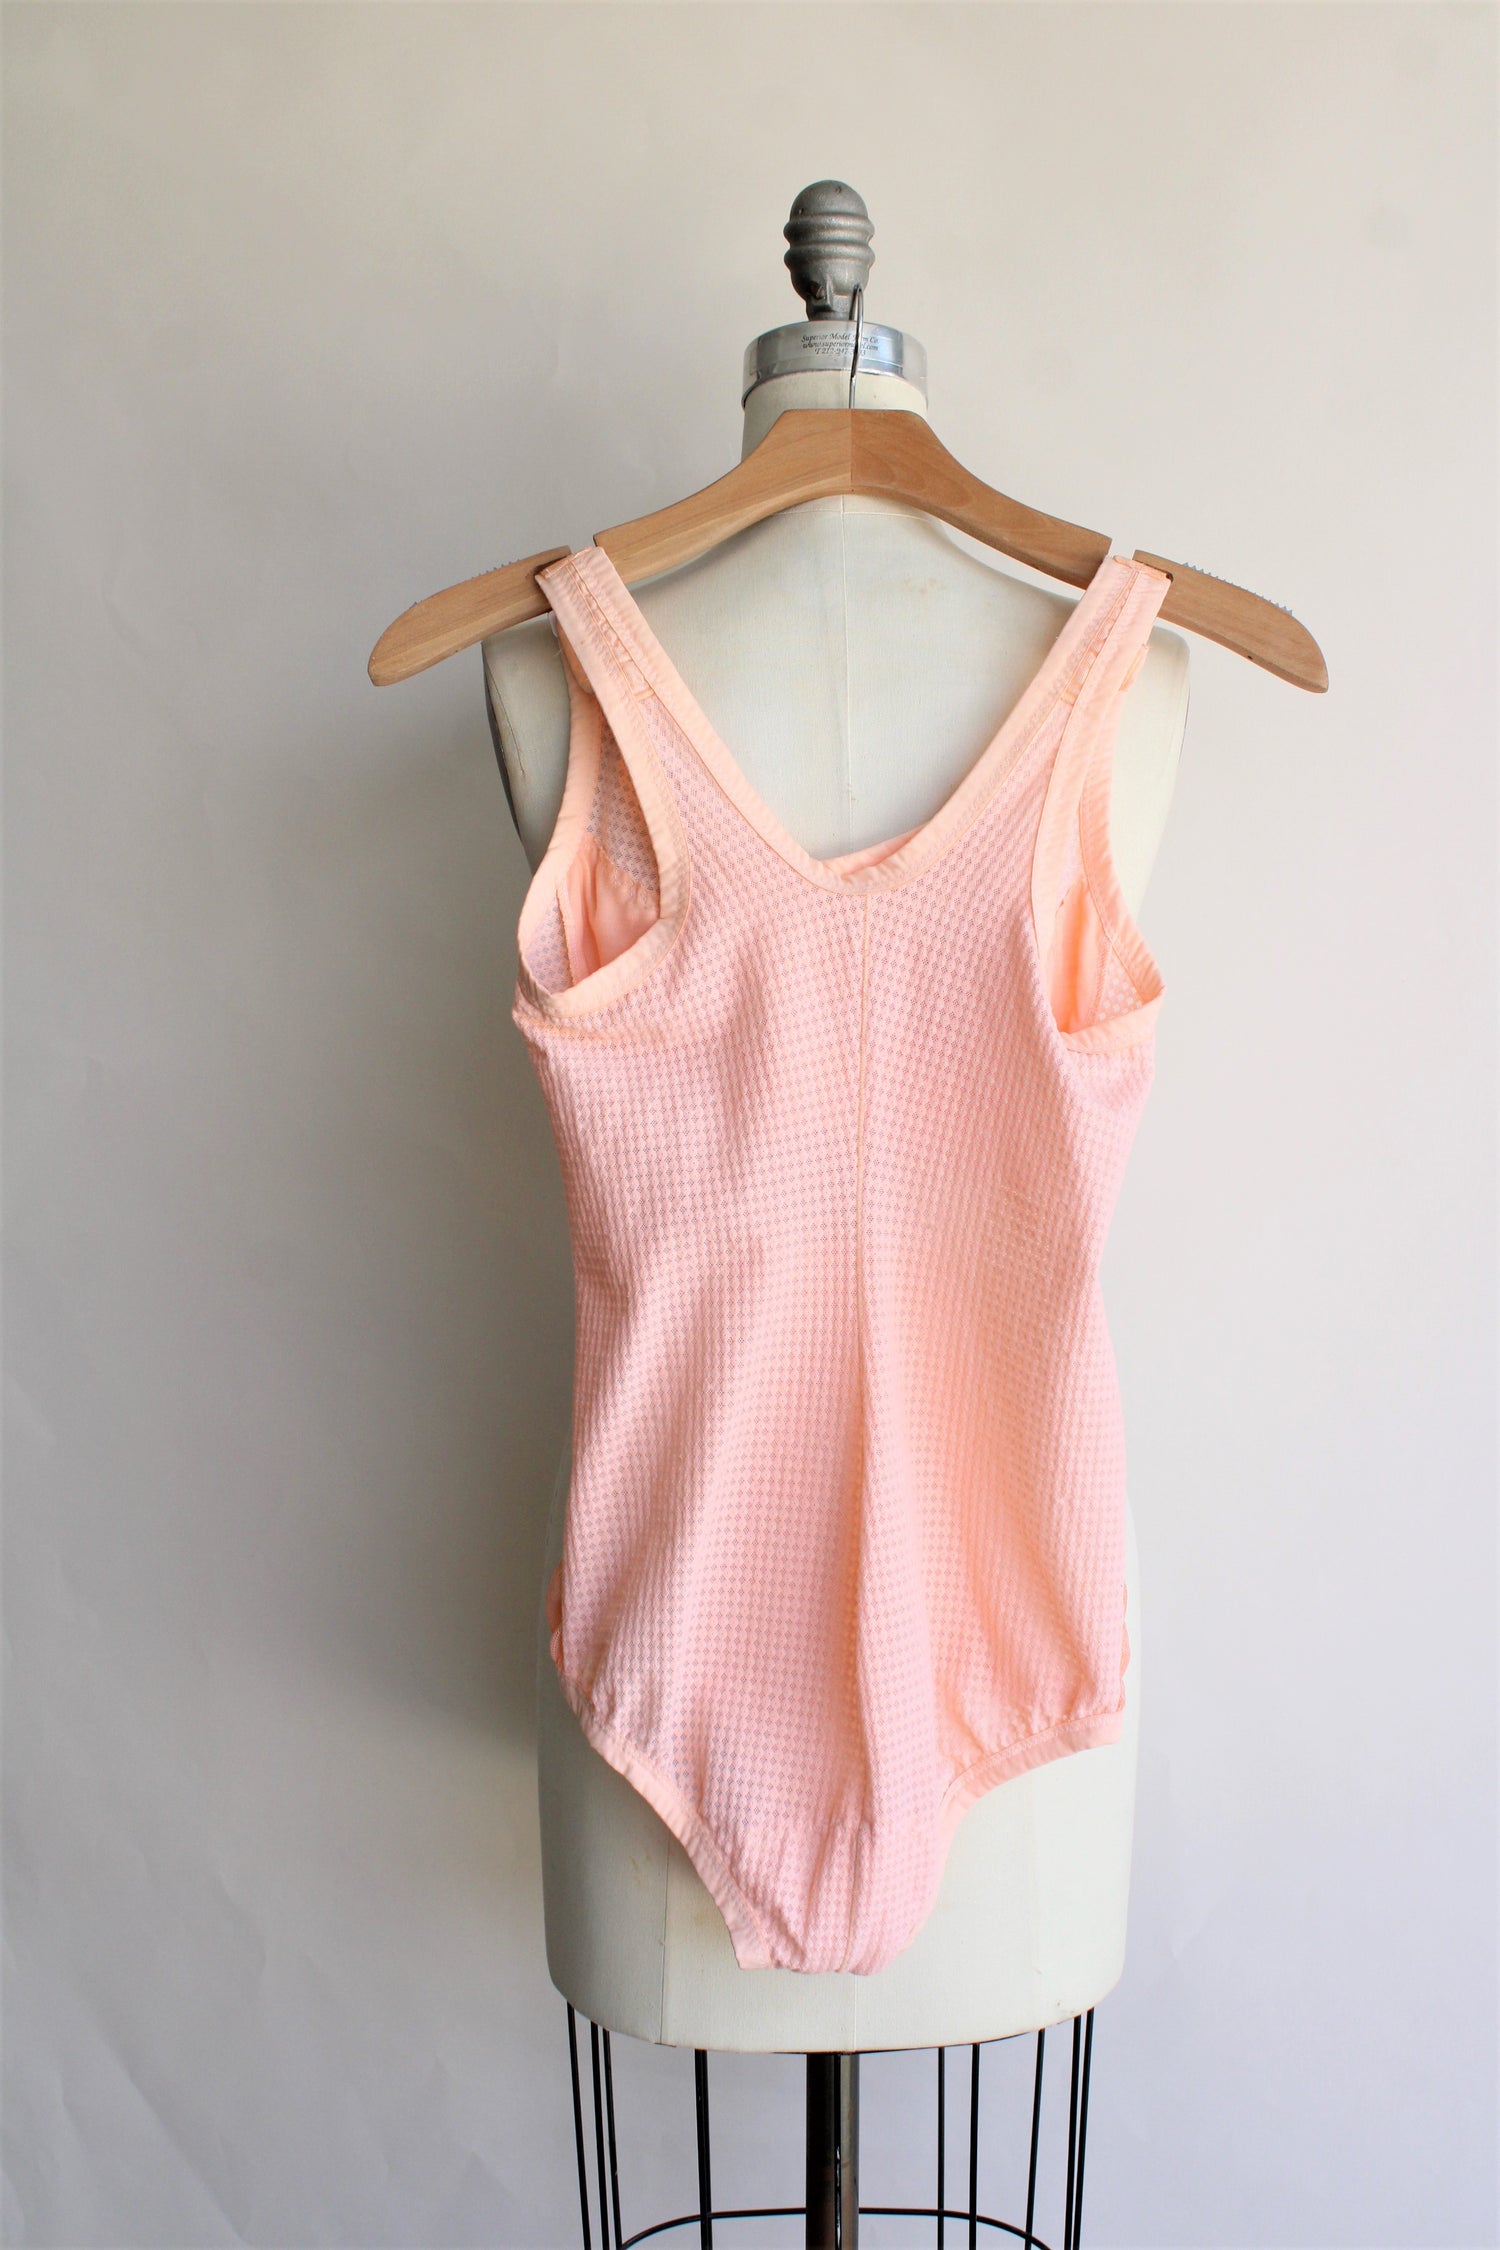 Vintage 1970s 1980s Peach Body Suit Shapewear by Miss Mary of